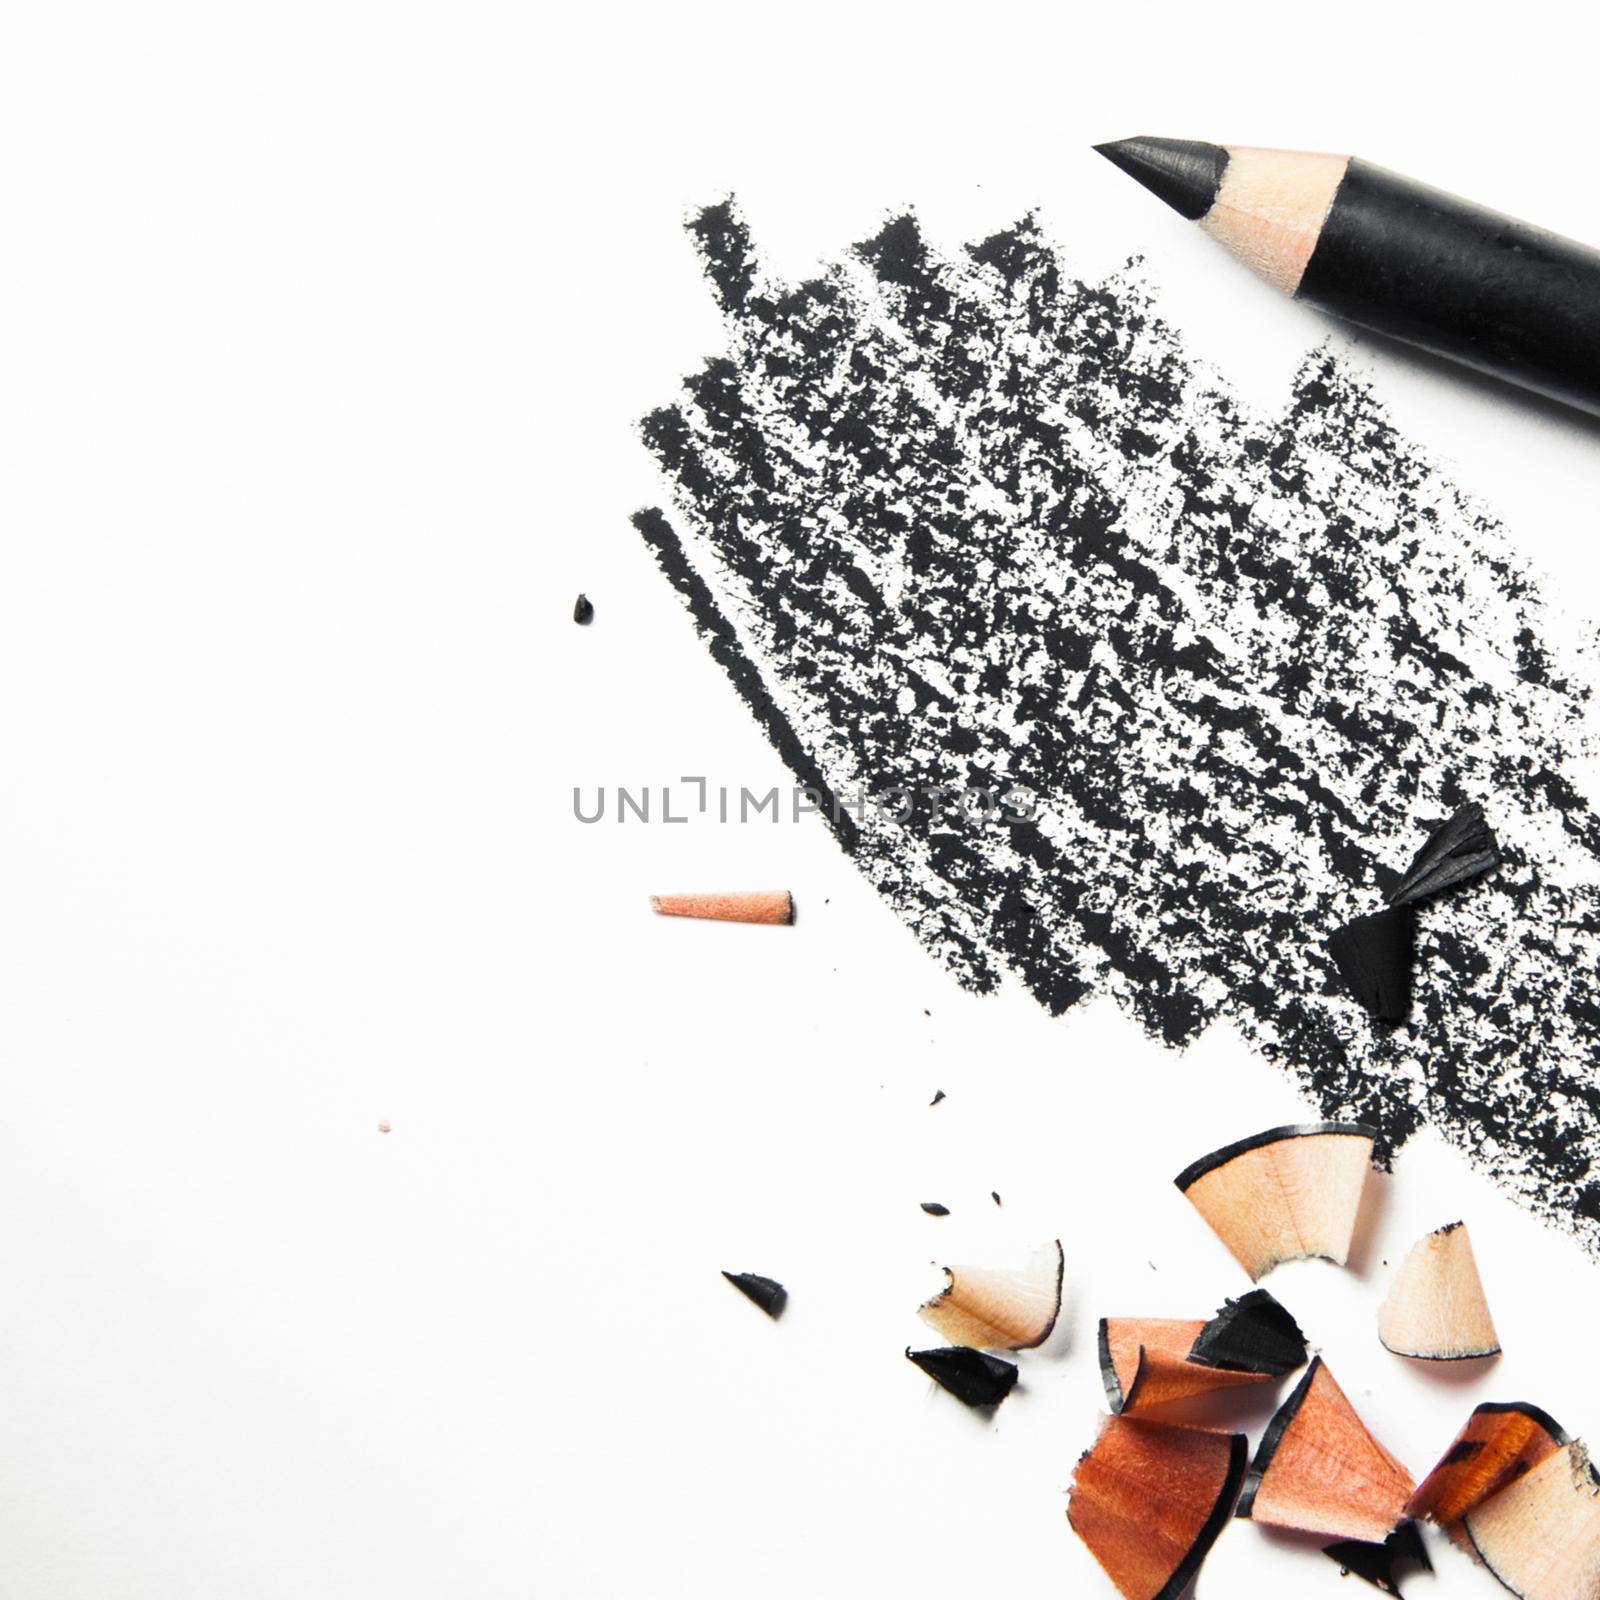 crushed make-up products - beauty and cosmetics styled concept